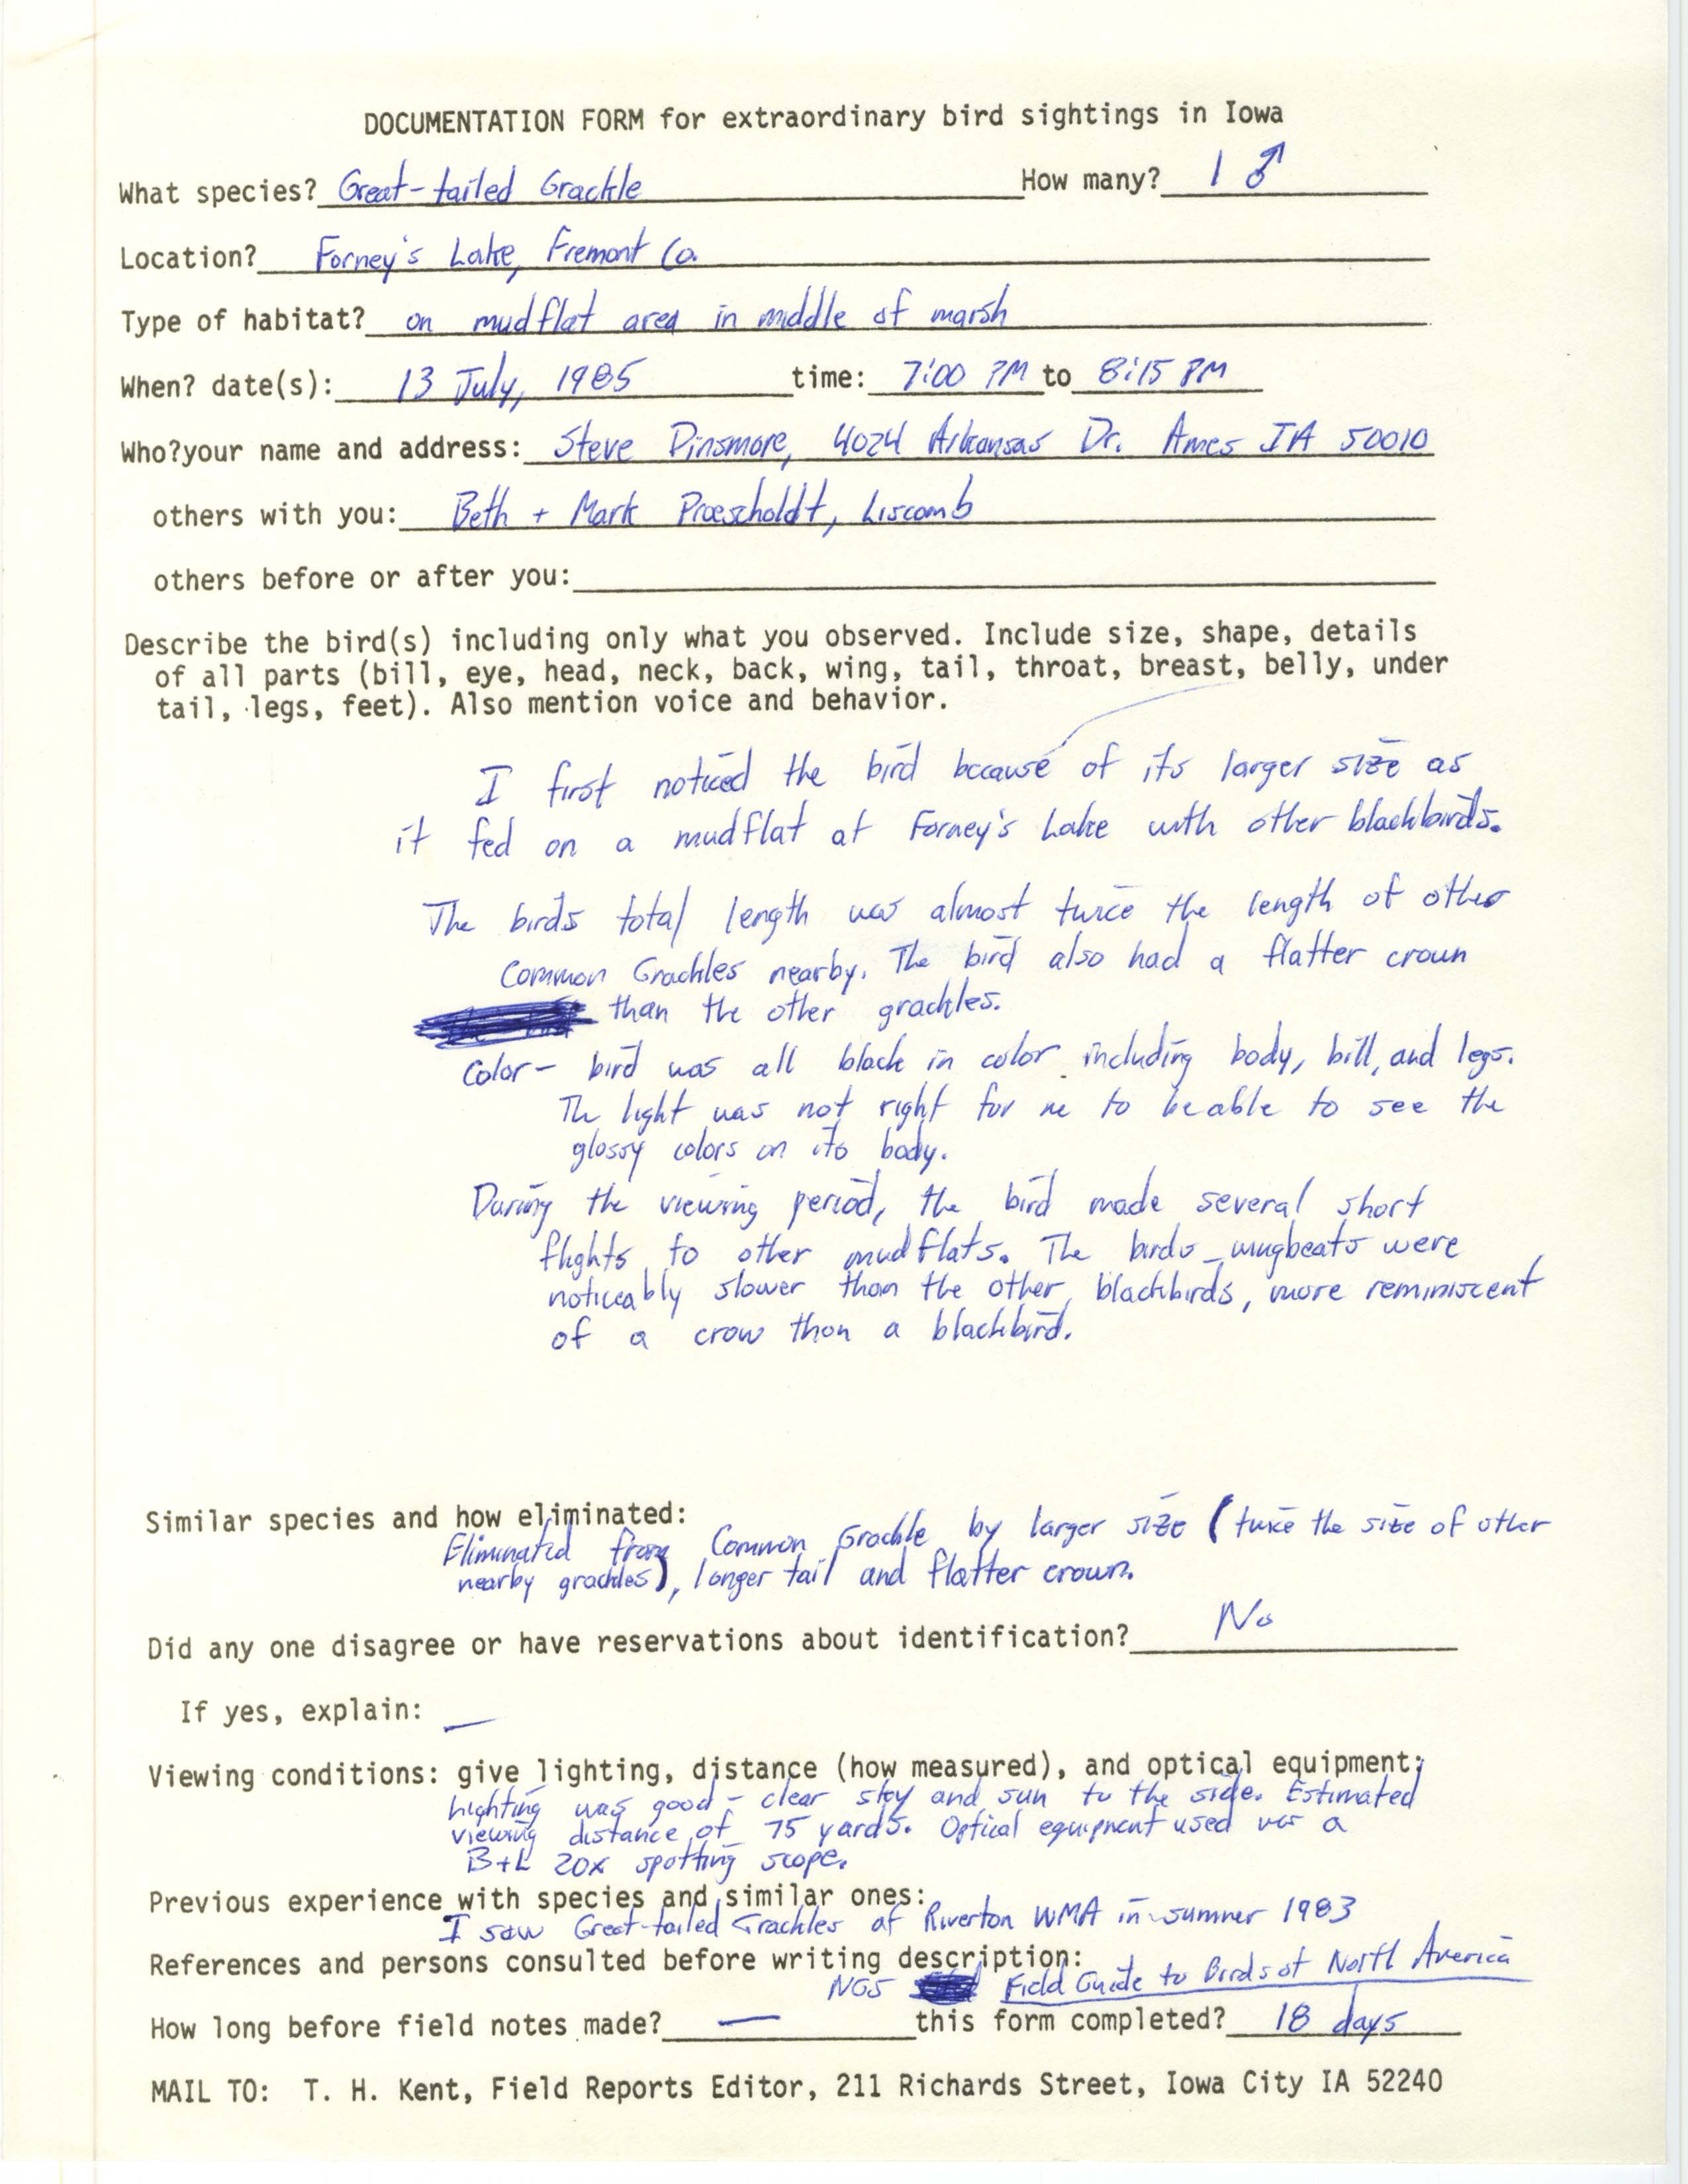 Rare bird documentation form for Great-tailed Grackle at Forney's Lake, 1985